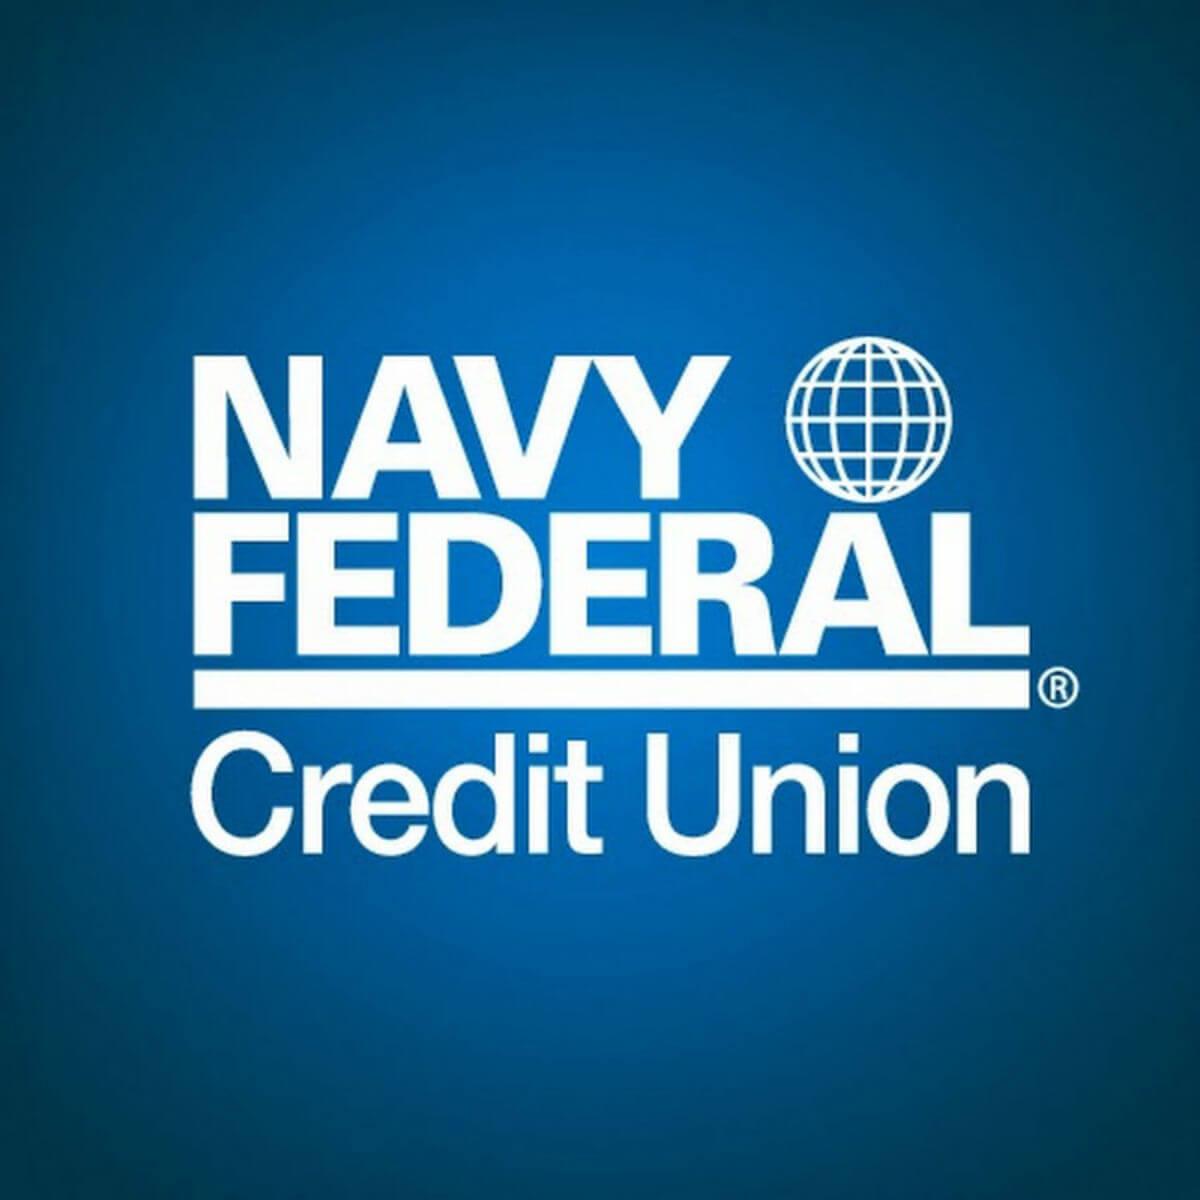 Nfcu Logo - Navy Federal Credit Union Projects